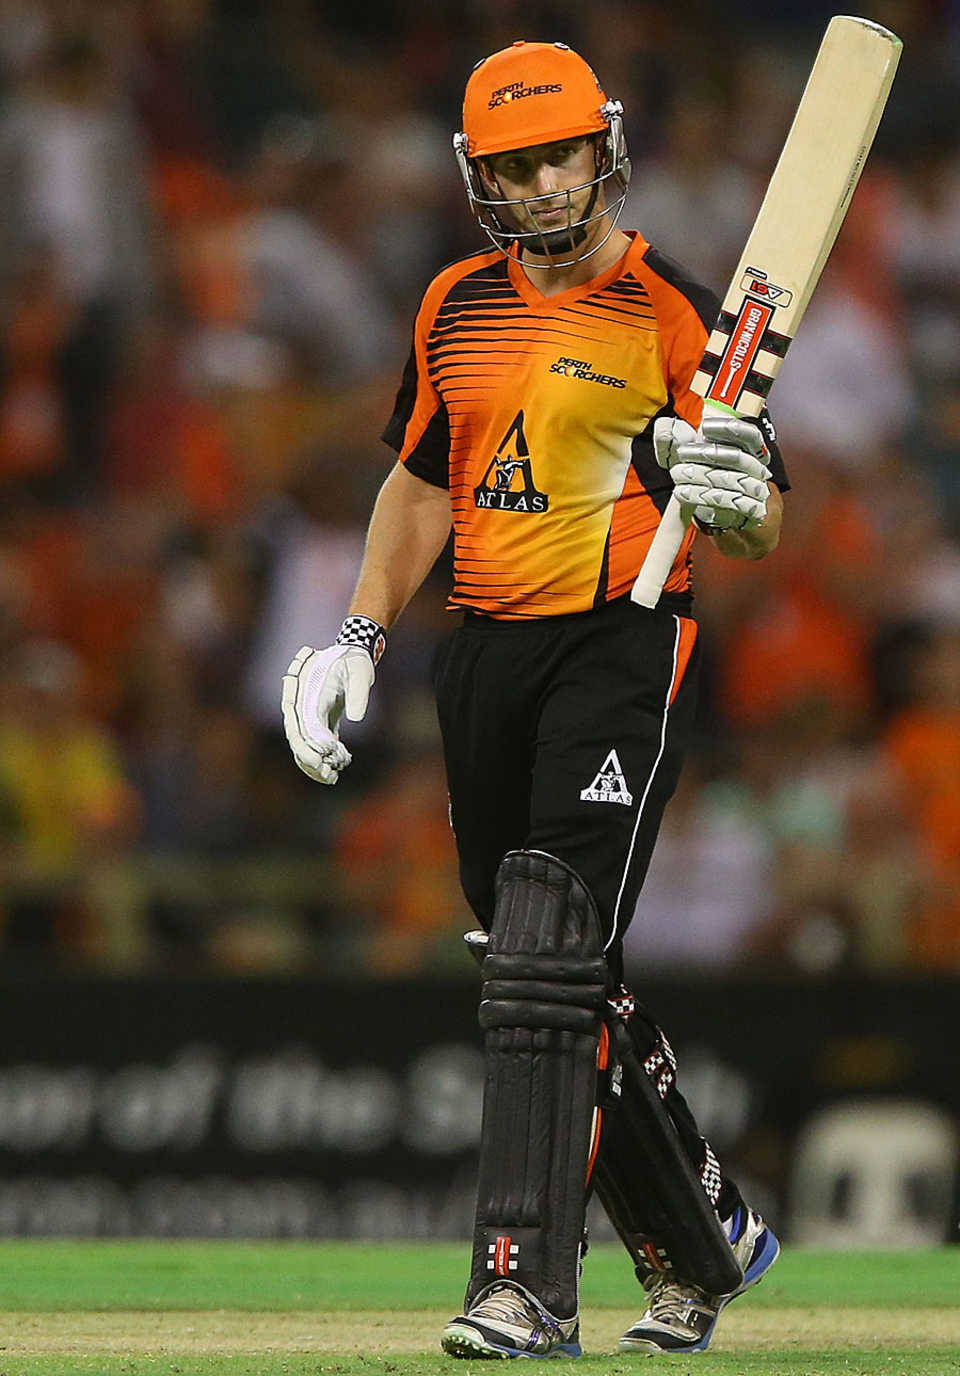 Shaun Marsh's 56 led Perth Scorchers to an easy win